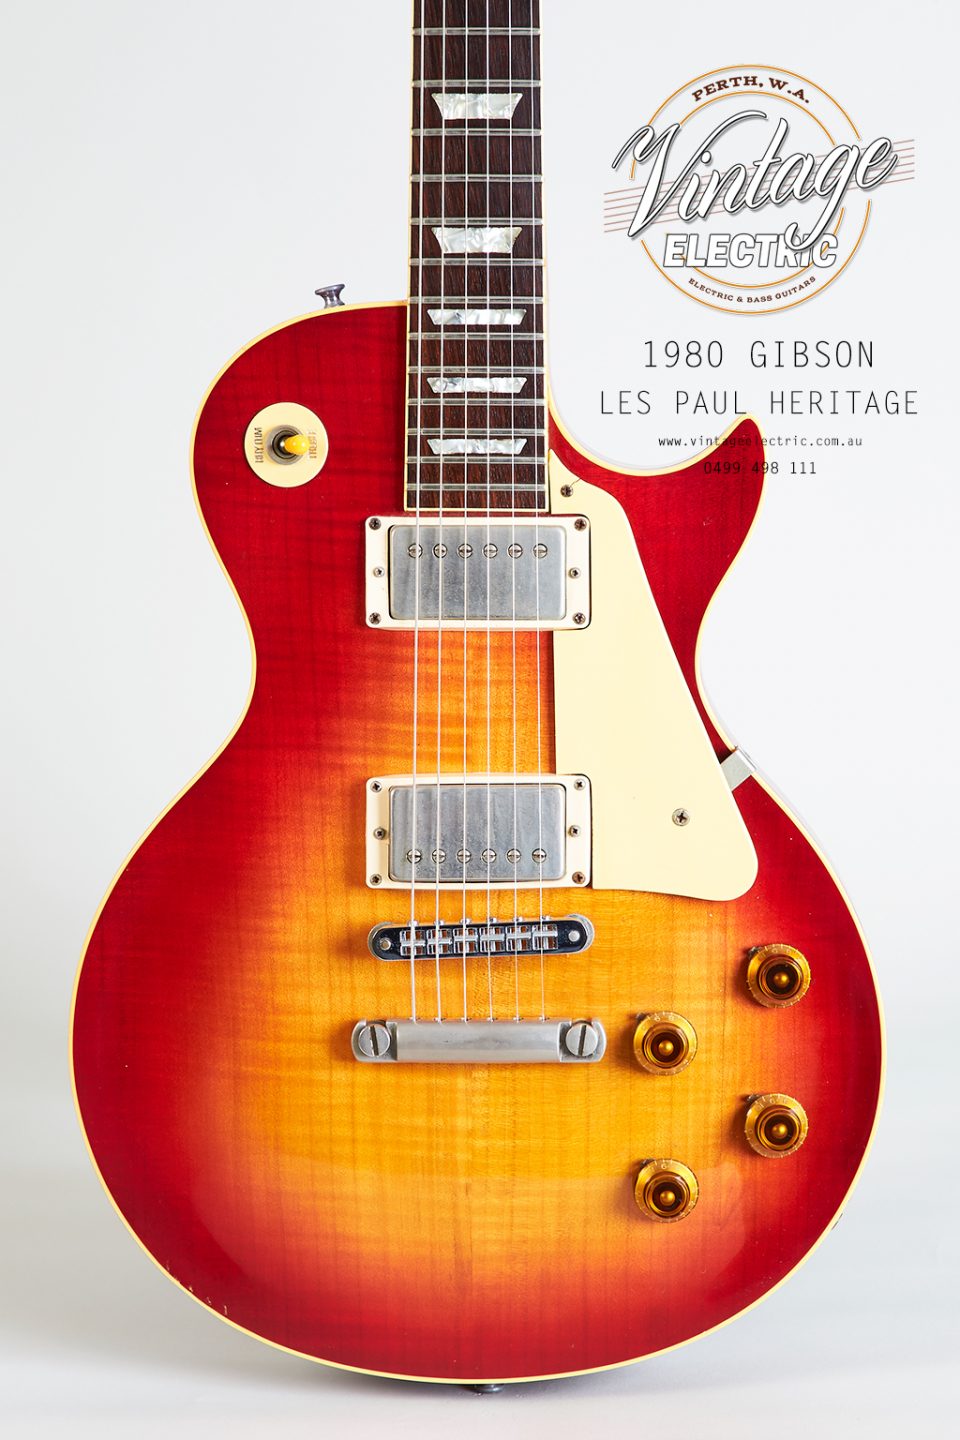 1980 Gibson Les Paul Heritage Body